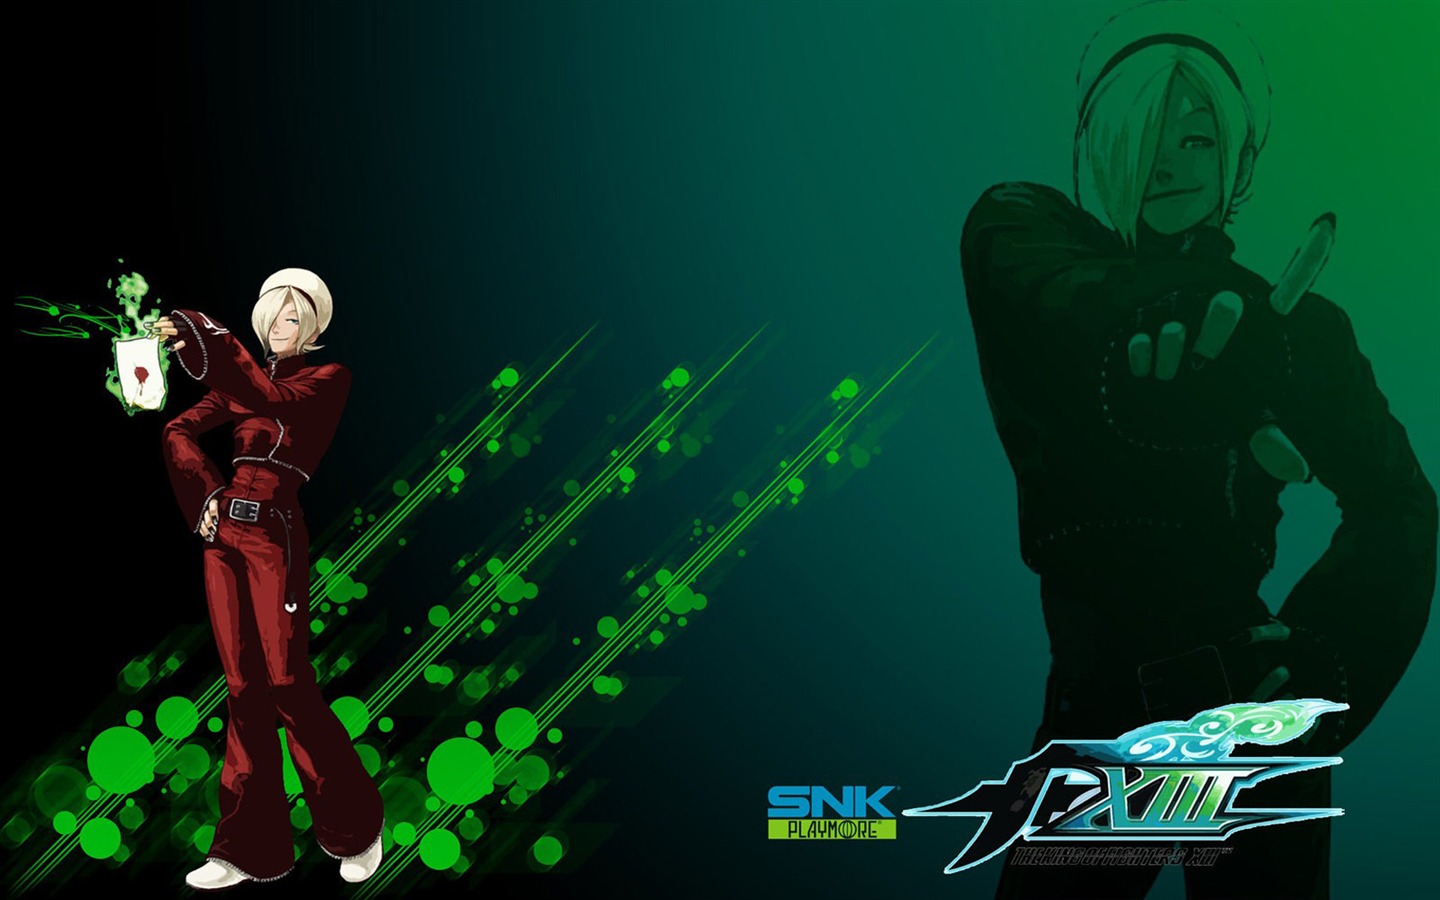 Le roi de wallpapers Fighters XIII #10 - 1440x900